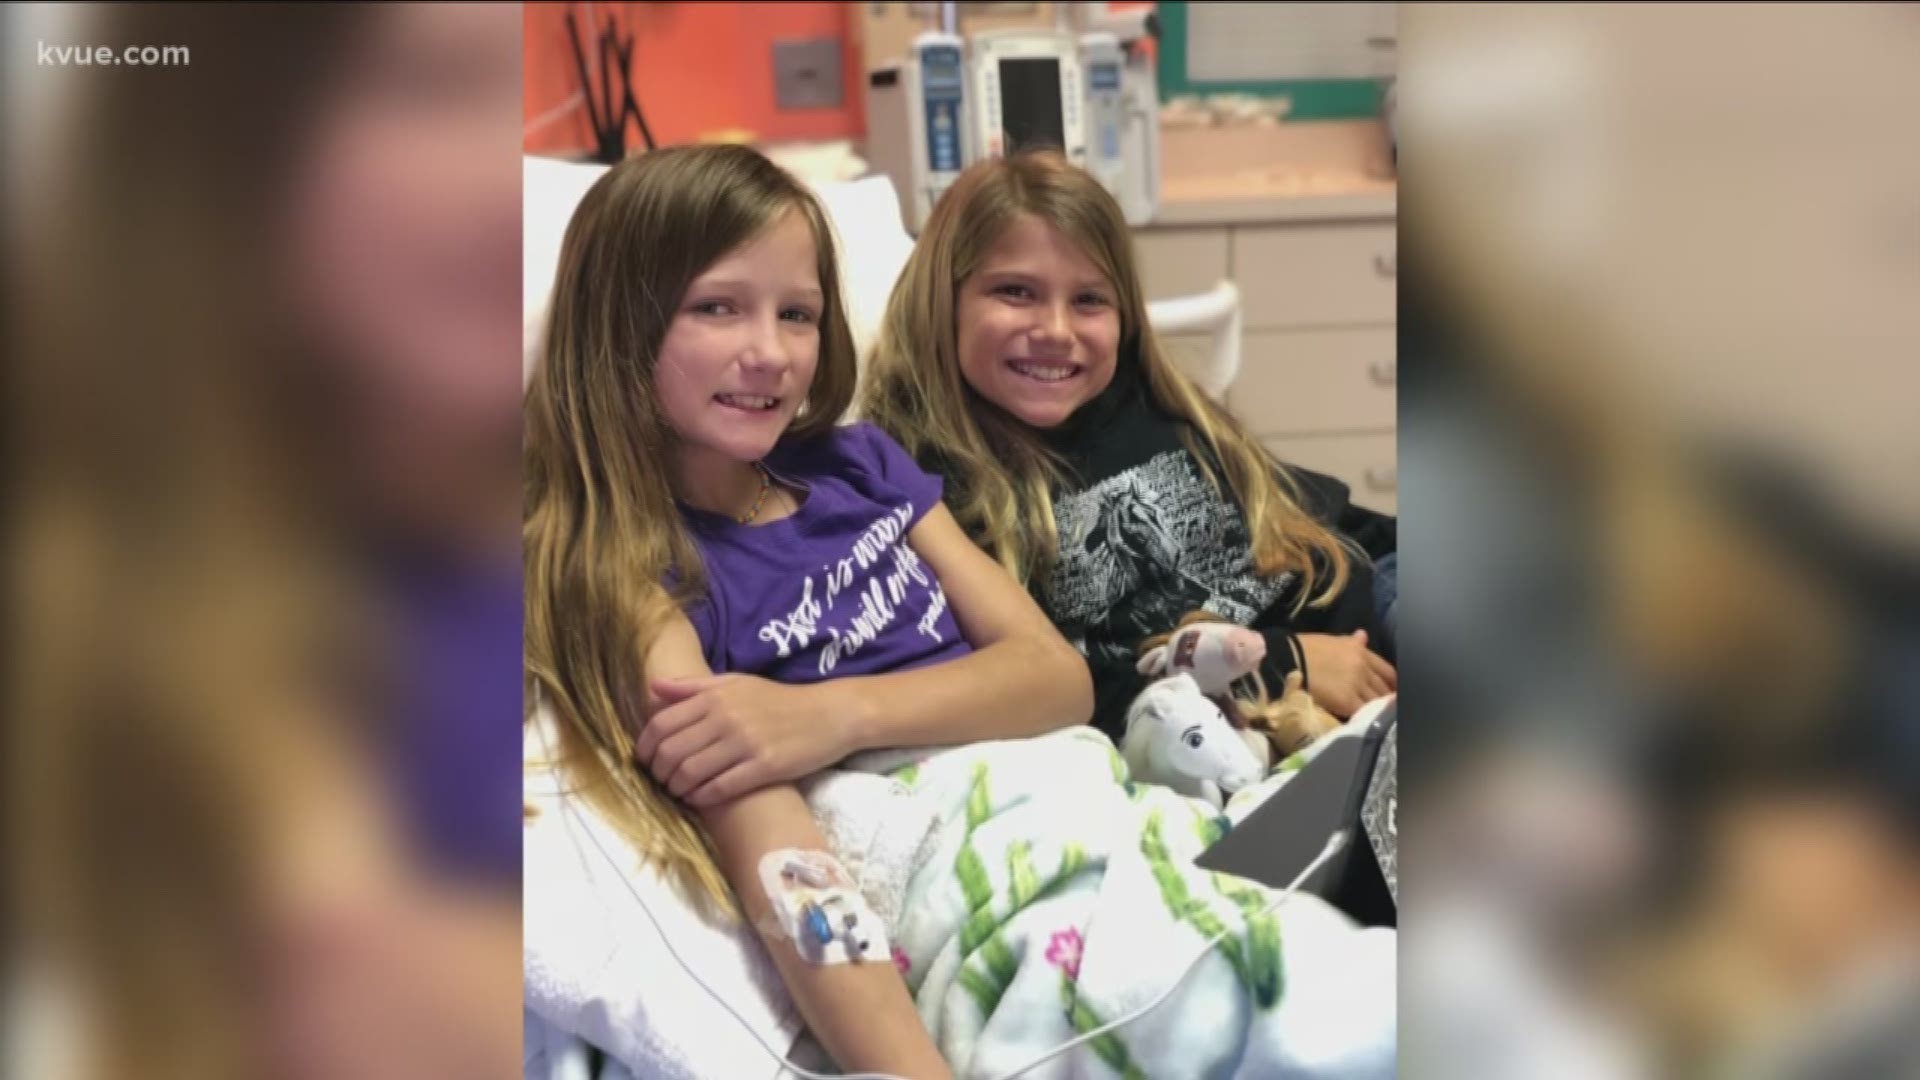 A Hays County girl who had a rare brain tumor is now cancer free, and doctors are amazed.